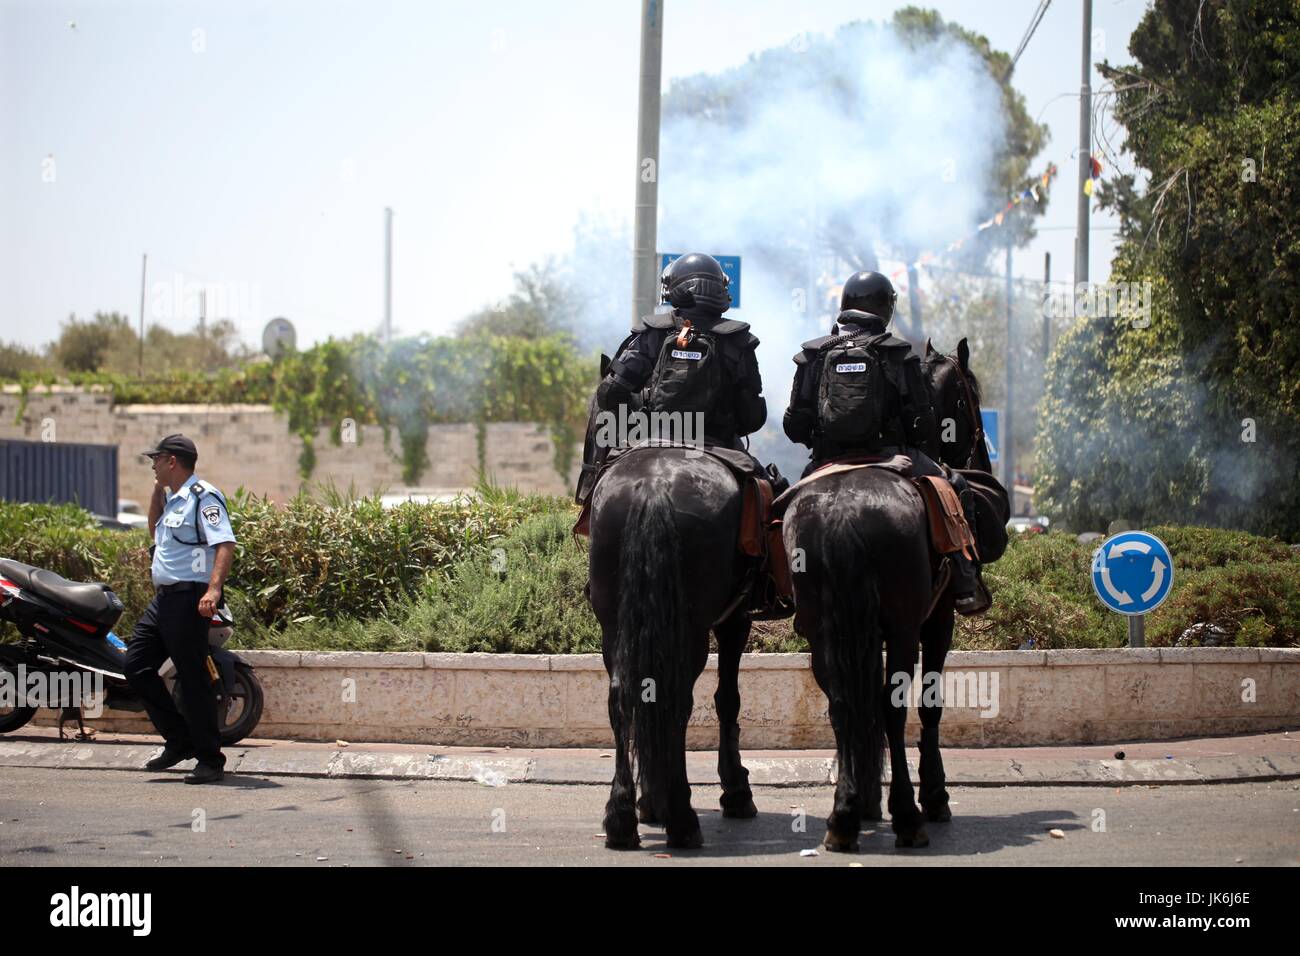 July 21, 2017 - Jerusalem, Israel - Horse mounted Israeli security forces patrol during clashes with Palestinian protesters following Friday prayer outside Jerusalem's Old City, after Israeli police barred men under 50 from entering the Old City for Friday Muslim prayers as tensions rose and protests erupted over new security measures at the highly sensitive Al-Aqsa mosque compound. The ban came after Israeli ministers decided not to order the removal of metal detectors erected at entrances to the Al-Aqsa mosque compound, known to Jews as the Temple Mount, following an attack nearby a week ago Stock Photo